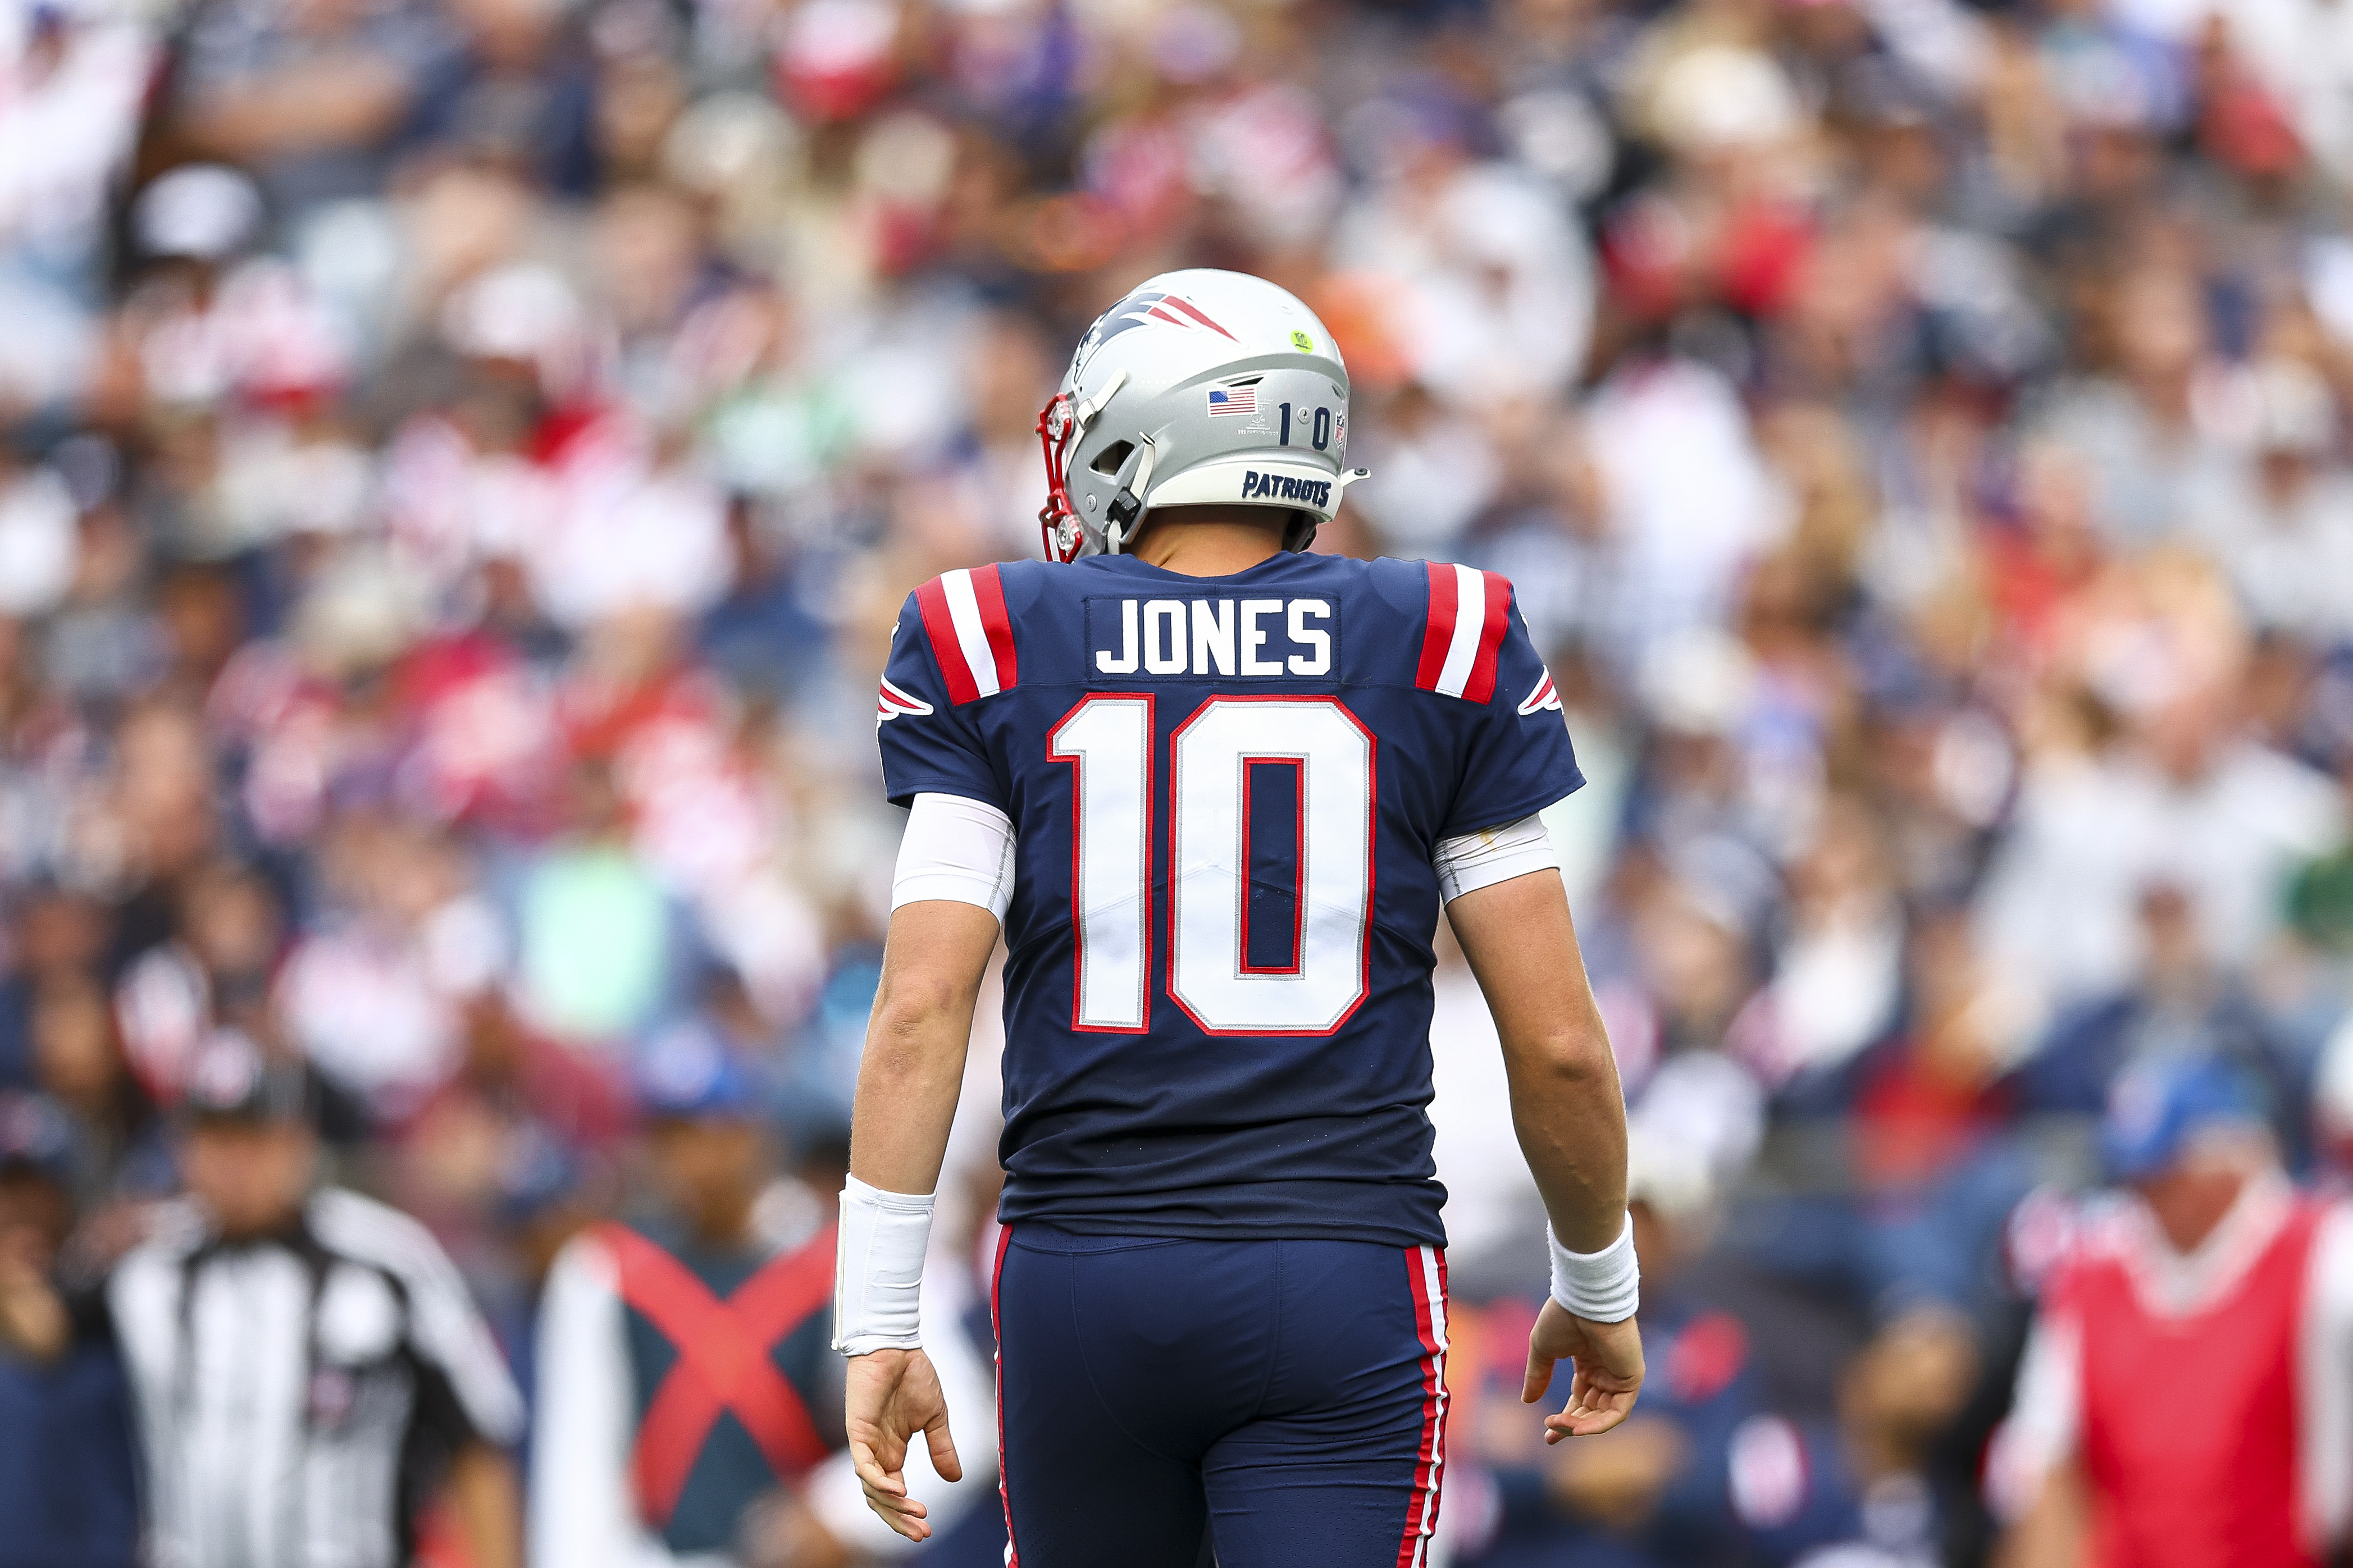 Mac Jones #10 of the New England Patriots looks on during the game against the Baltimore Ravens at Gillette Stadium on September 25, 2022 in Foxborough, Massachusetts.